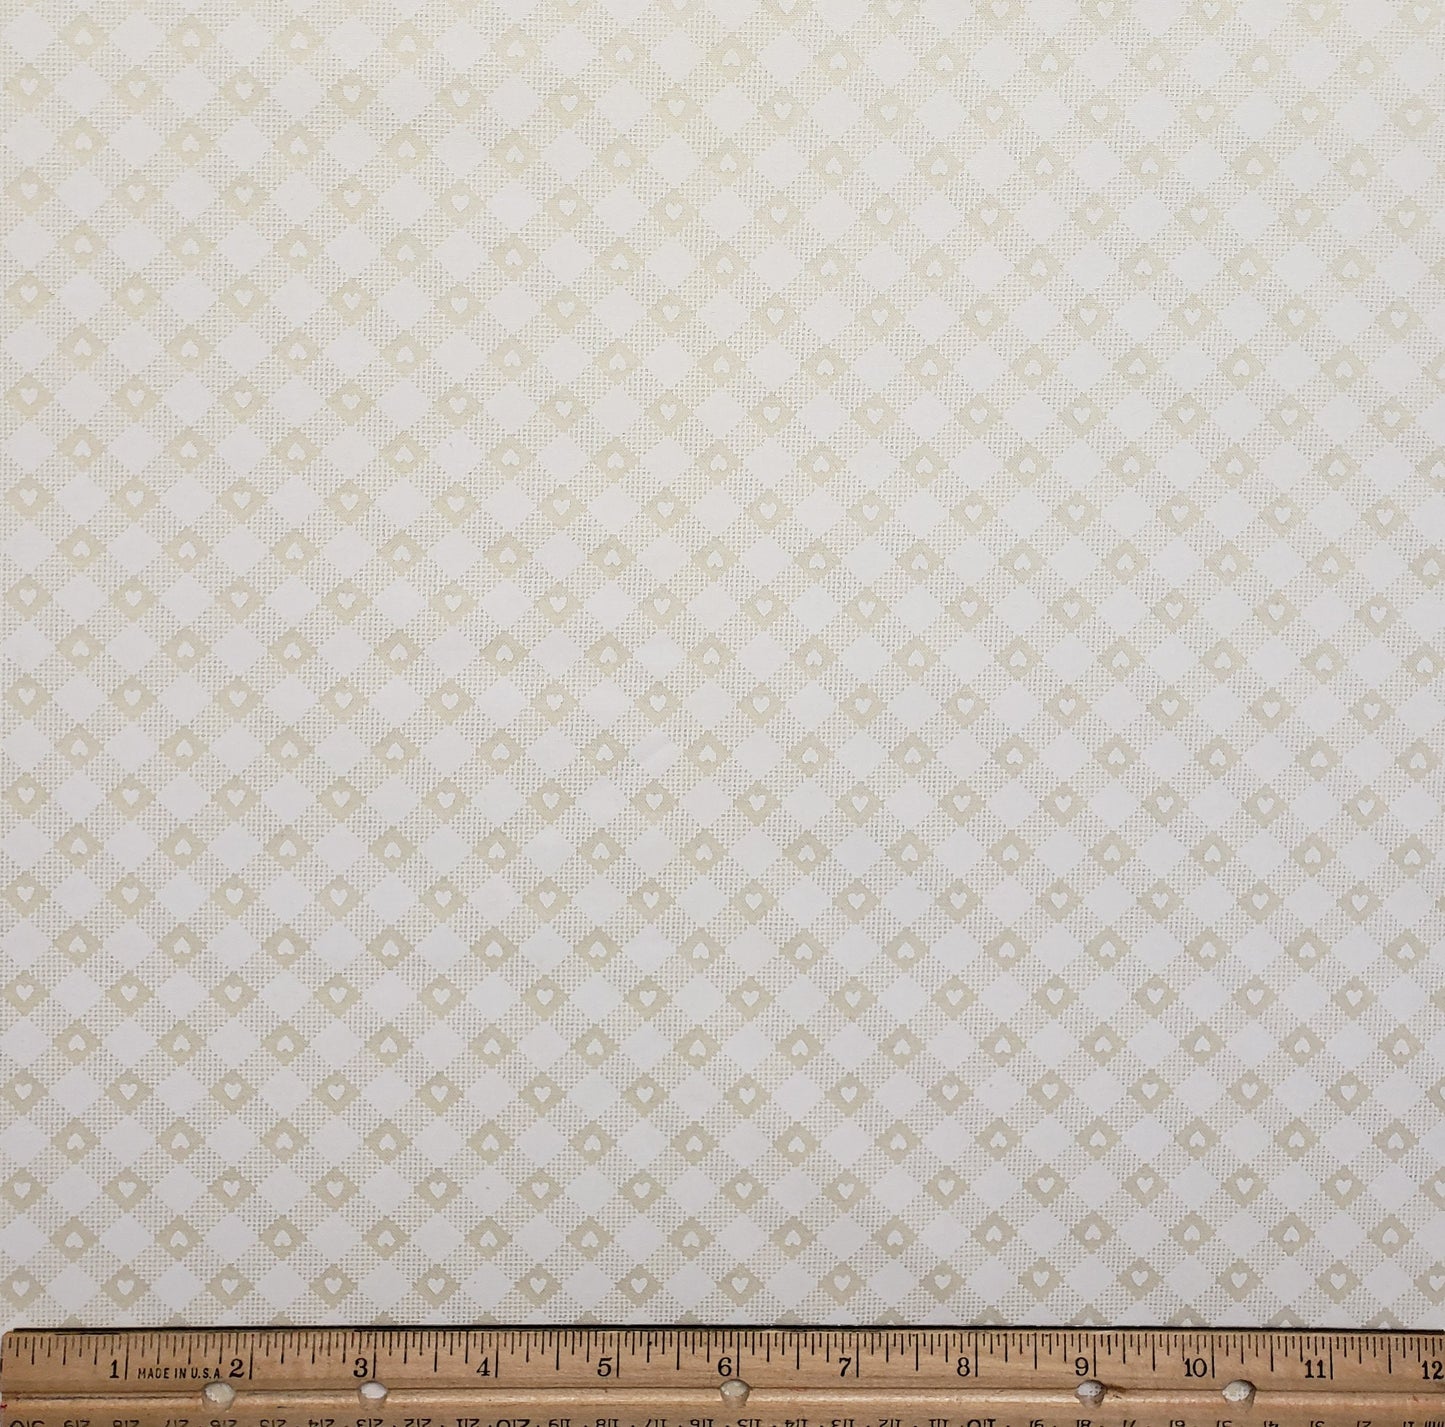 Fabric Traditions 1993 - Cream Fabric with Darker "Gingham" Pattern with White Hearts